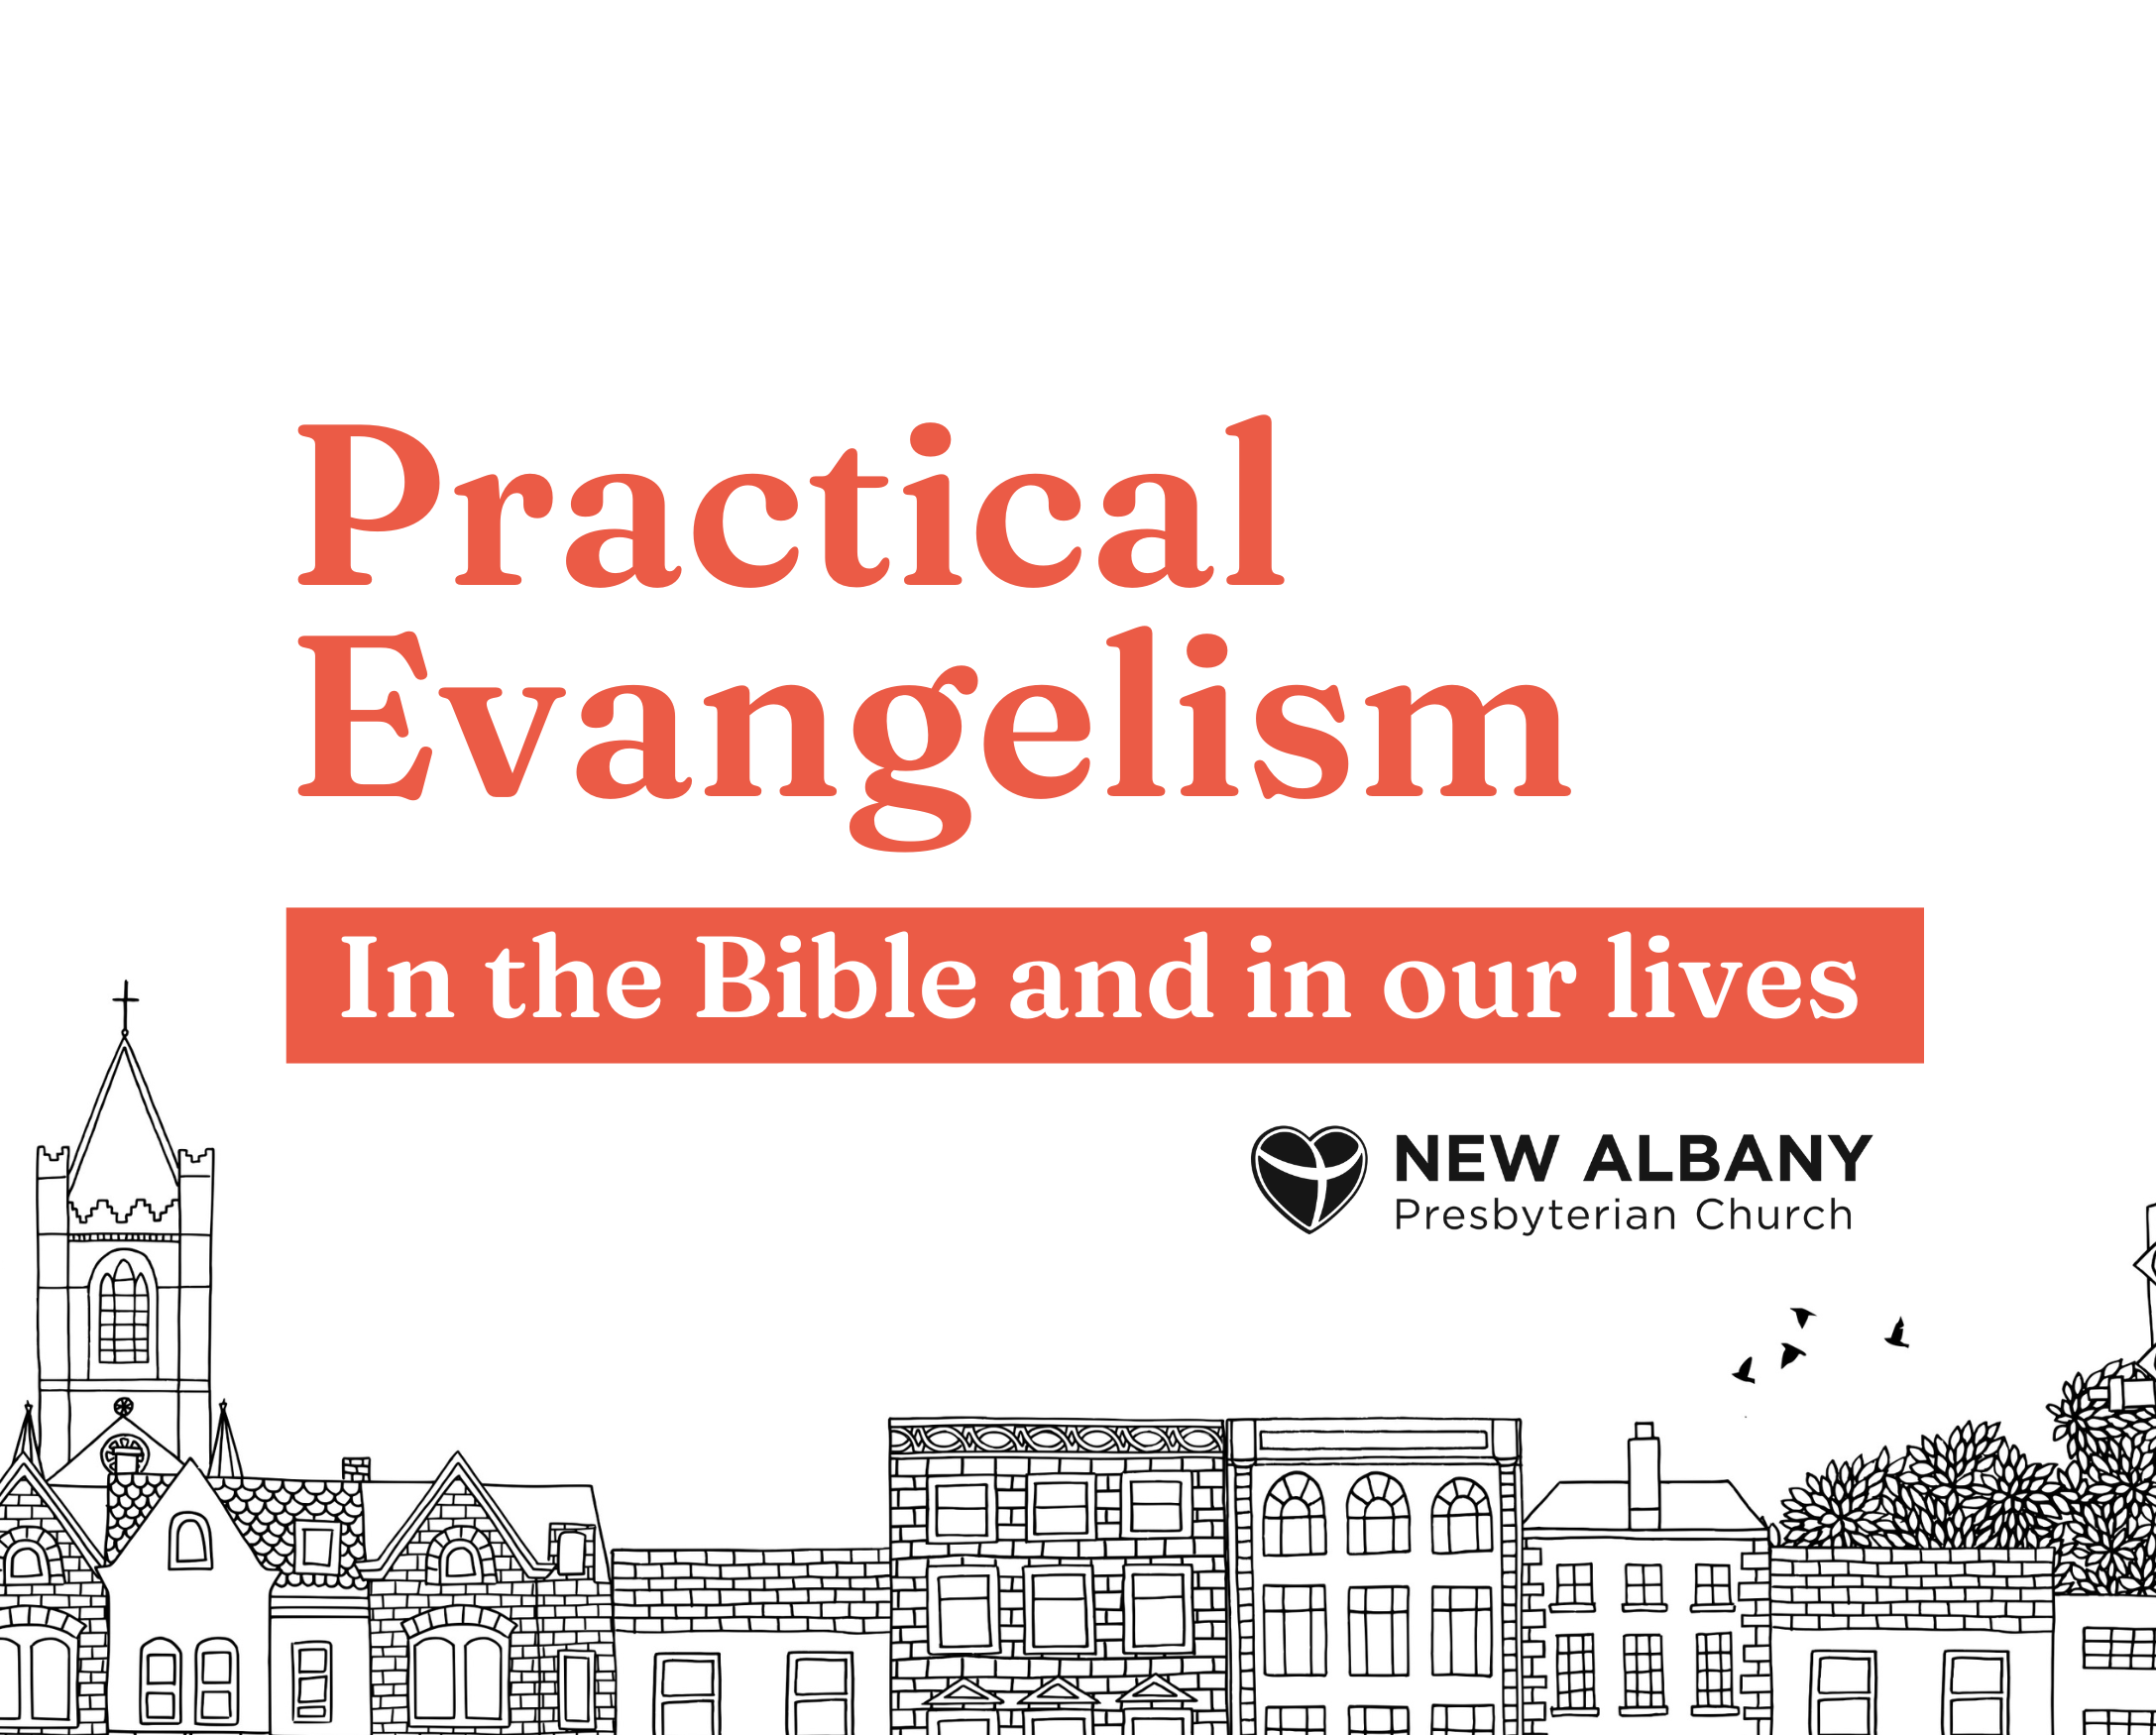 Practical Evangelism in the Bible and our lives: Repentance and Joy: Zacchaeus